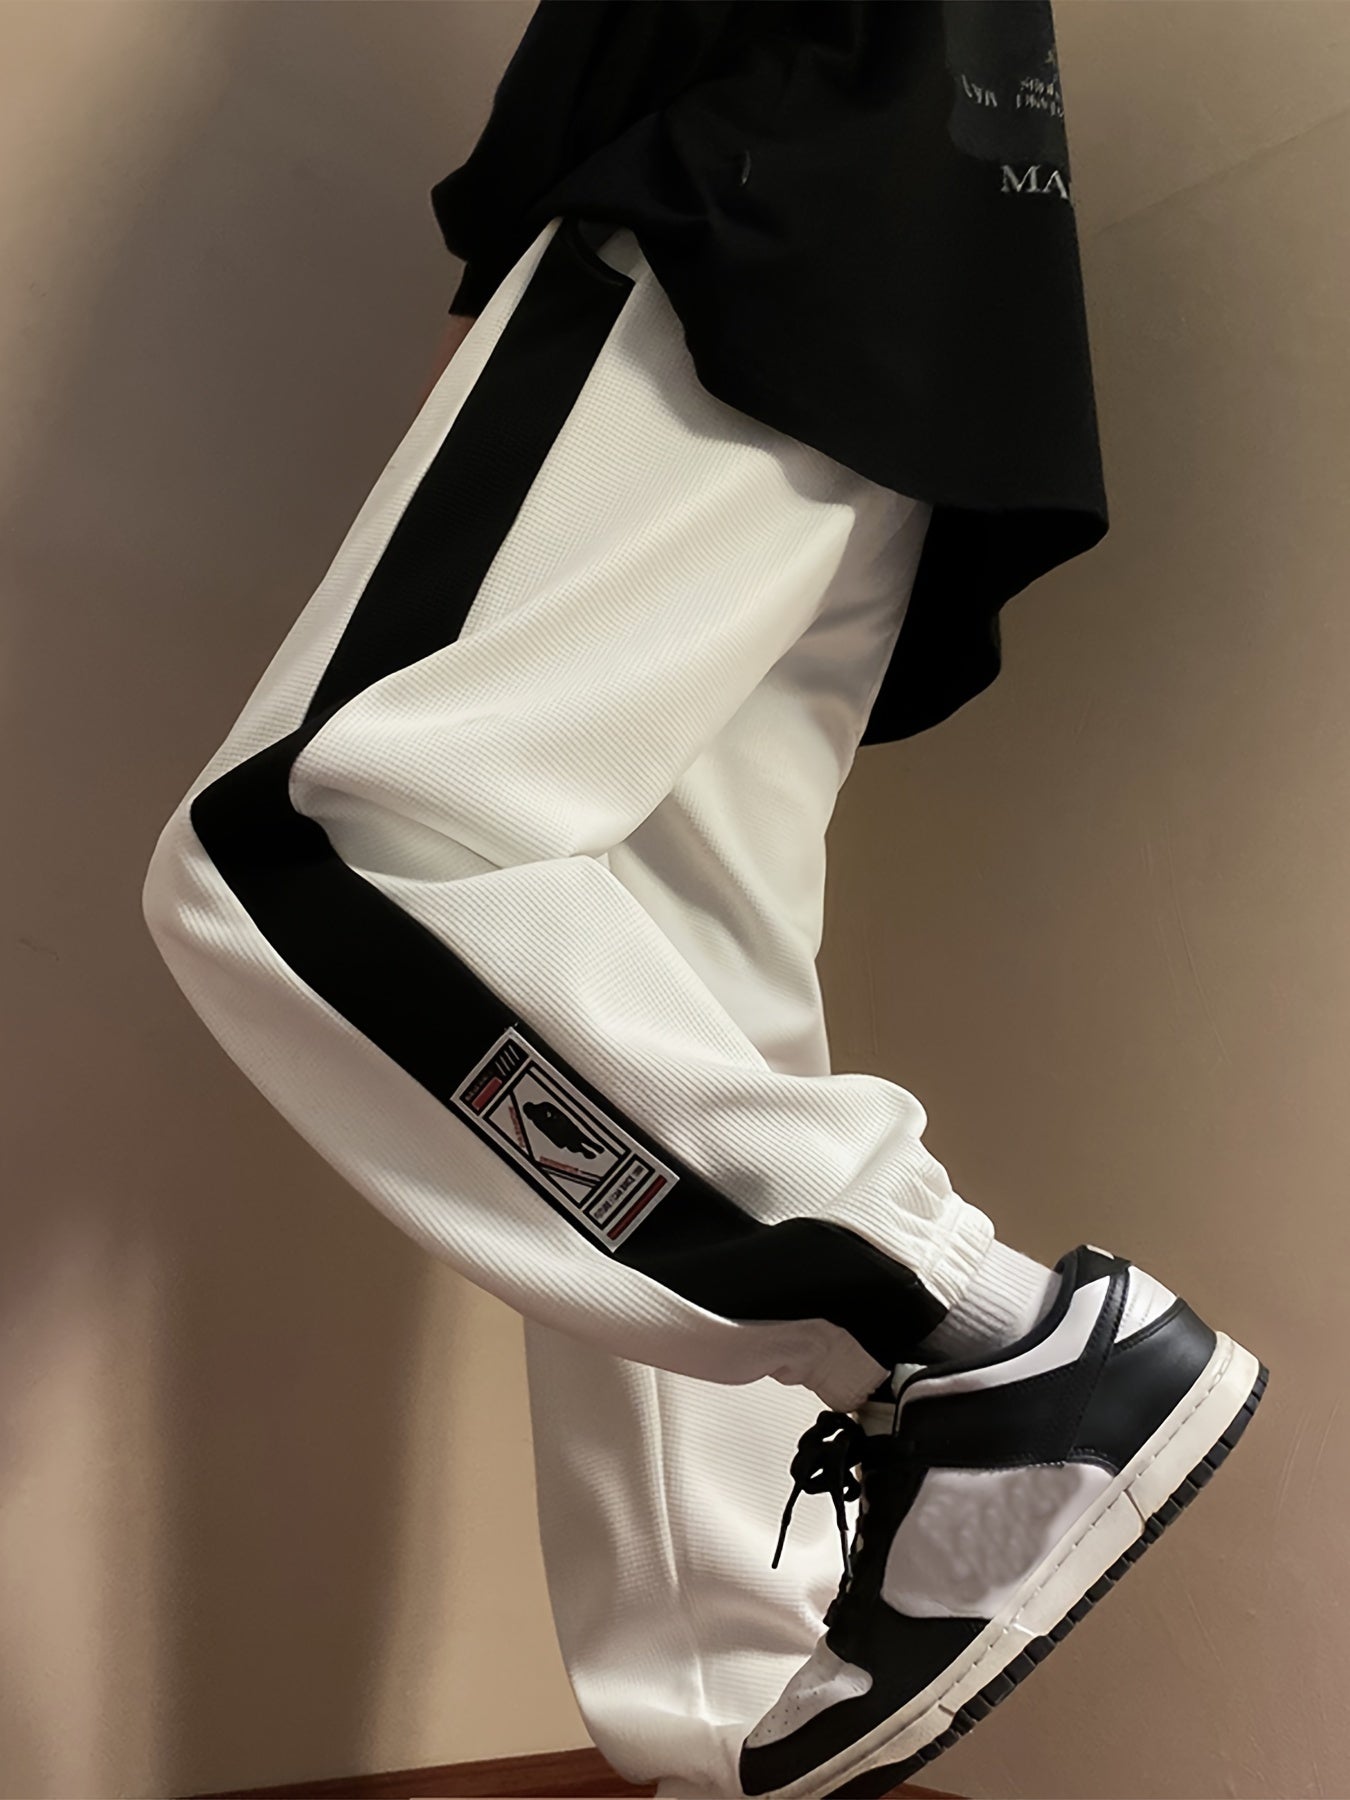 Stylish Men's Jogger Pants with Side Stripes - Perfect for Casual Weekends